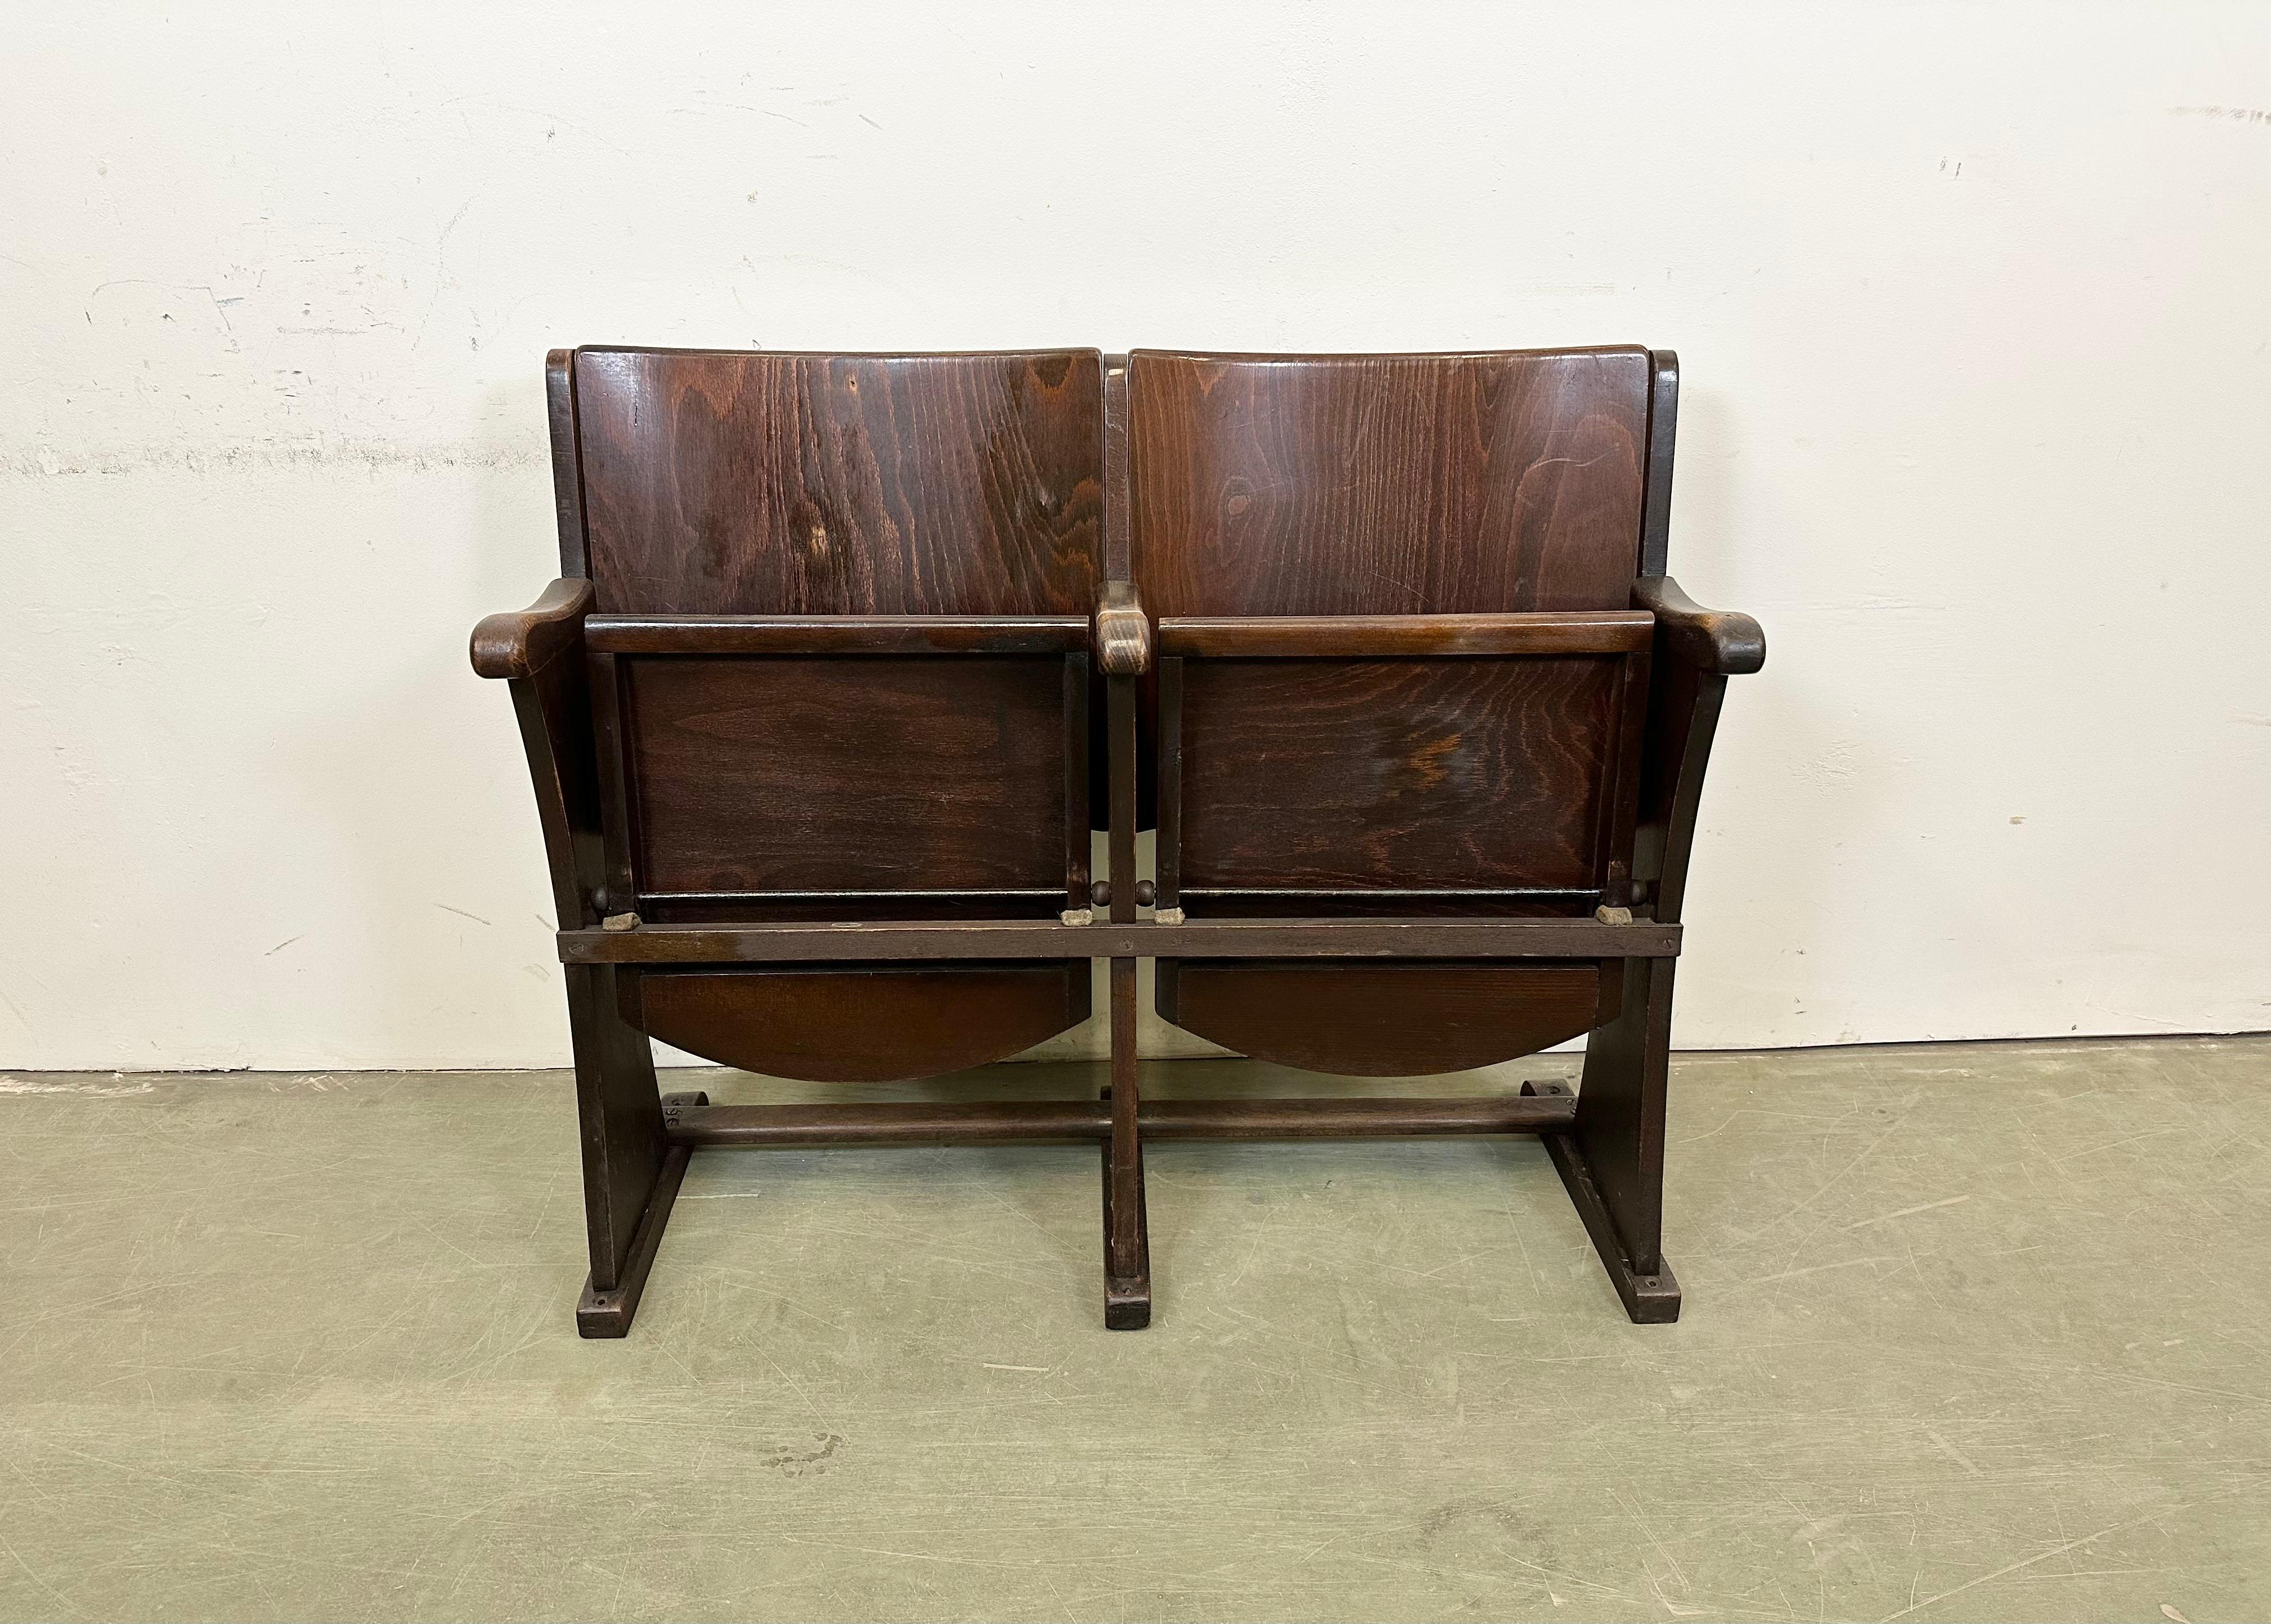 This two-seat cinema bench was produced by Thonet in former Czechoslovakia during the 1930s-1950s. The chairs are stable and can be placed anywhere. It is completely made of wood (partly solid wood, partly plywood). The seats fold upwards. The